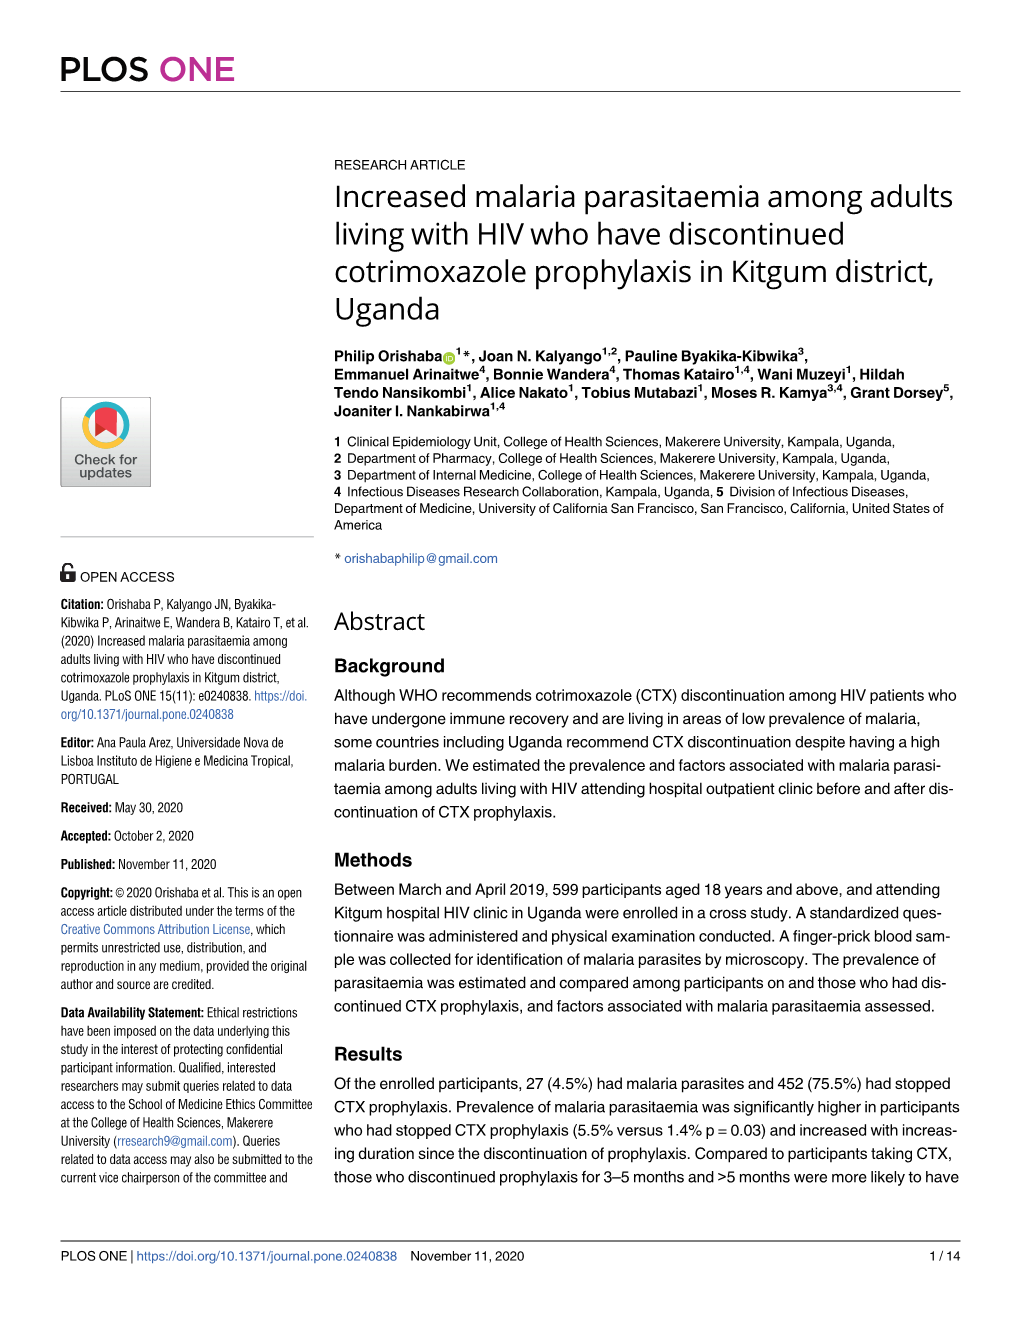 Increased Malaria Parasitaemia Among Adults Living with HIV Who Have Discontinued Cotrimoxazole Prophylaxis in Kitgum District, Uganda